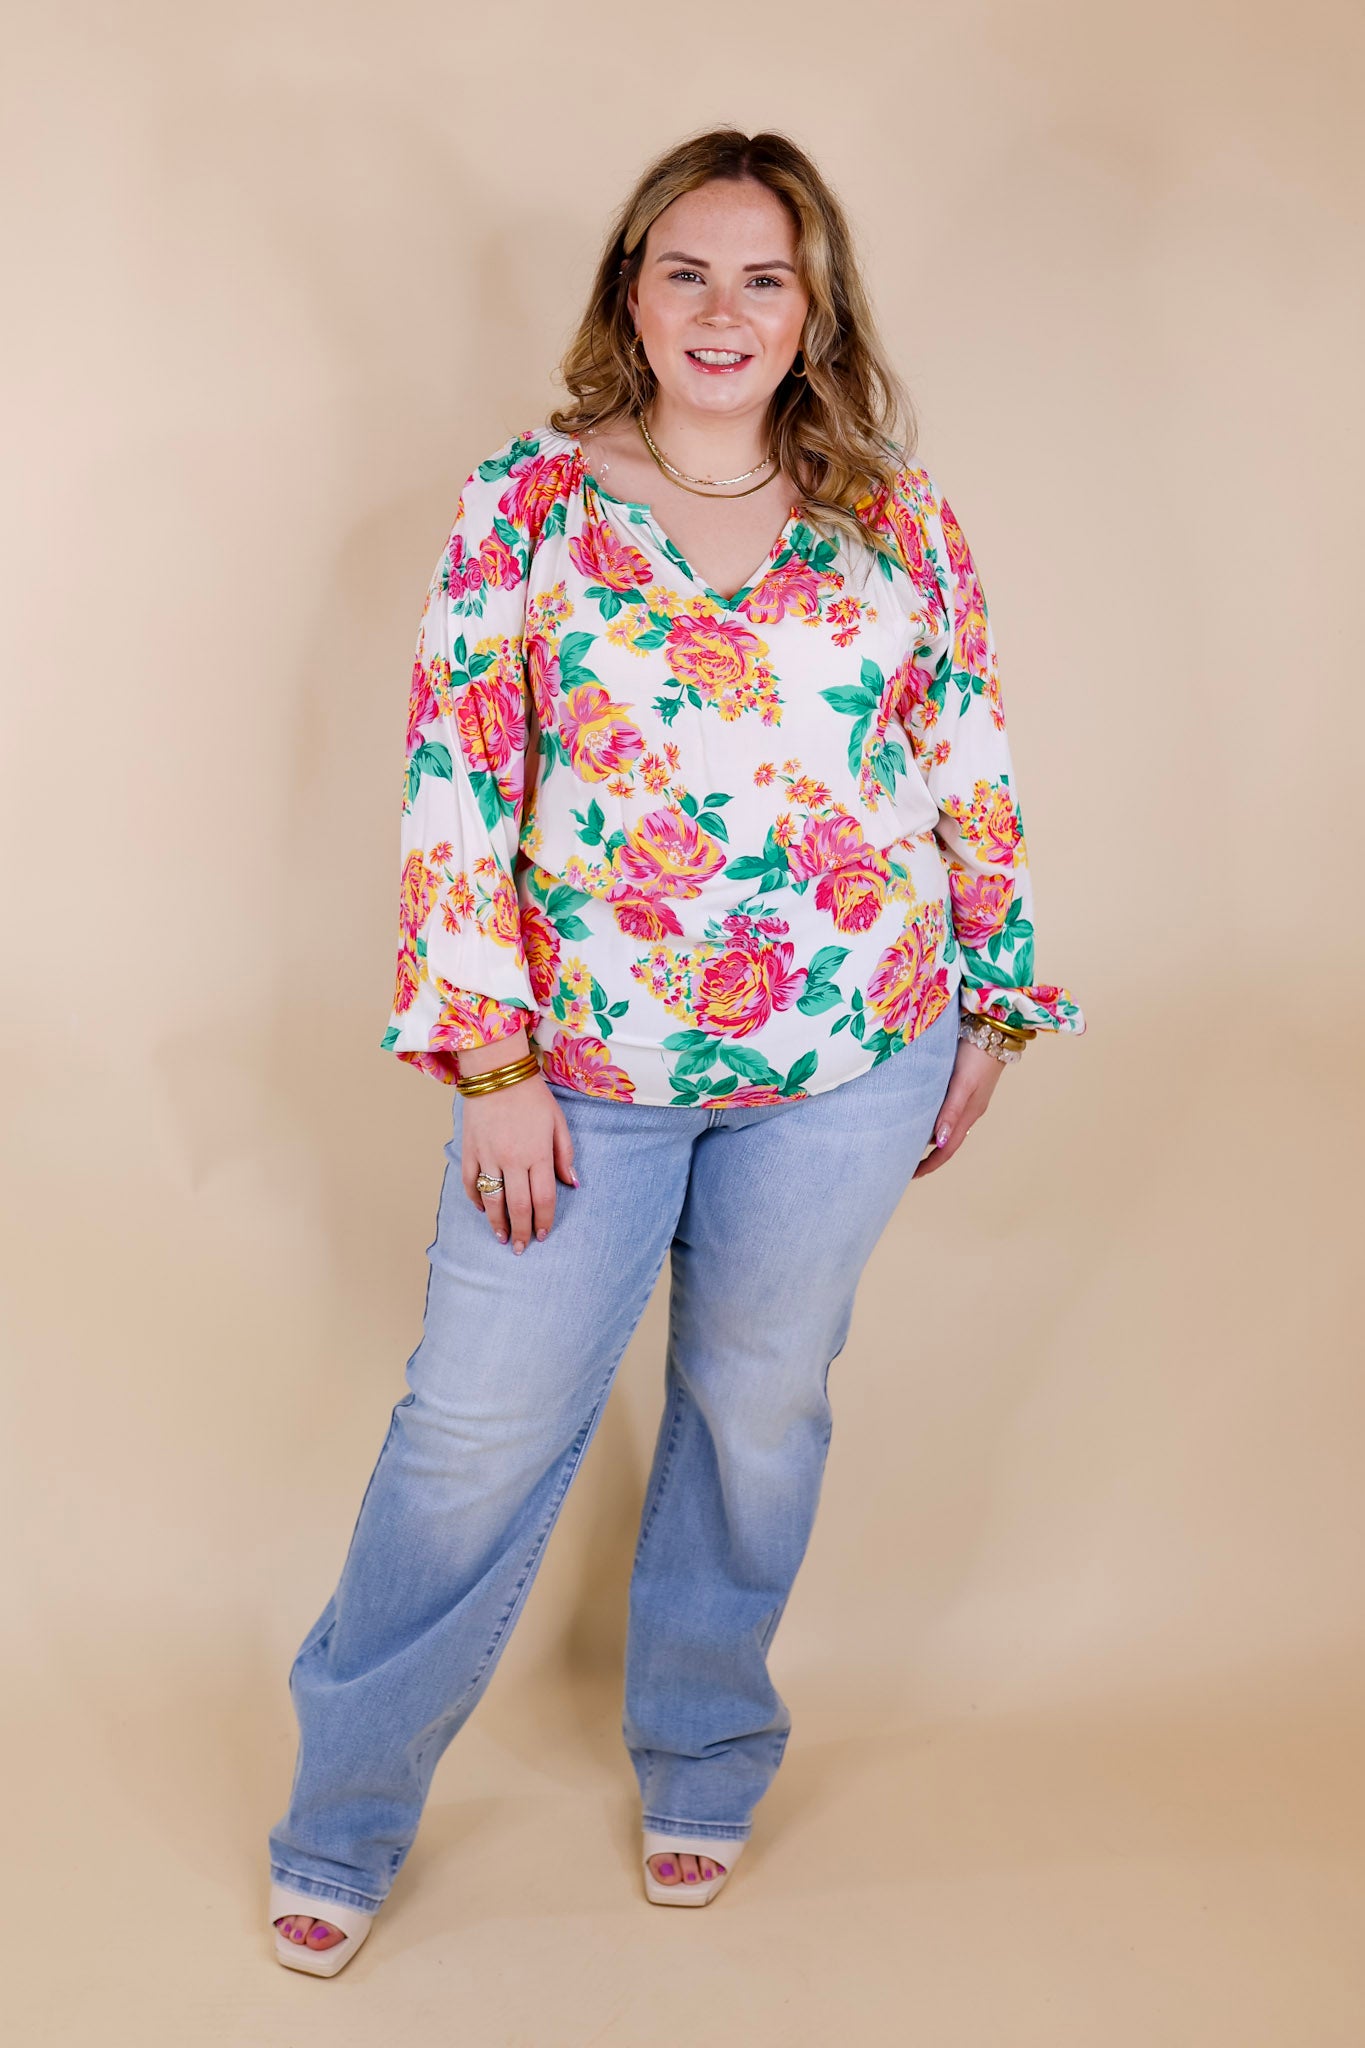 Follow Your Happiness Notched V Neck Floral Top with Long Sleeves in White - Giddy Up Glamour Boutique